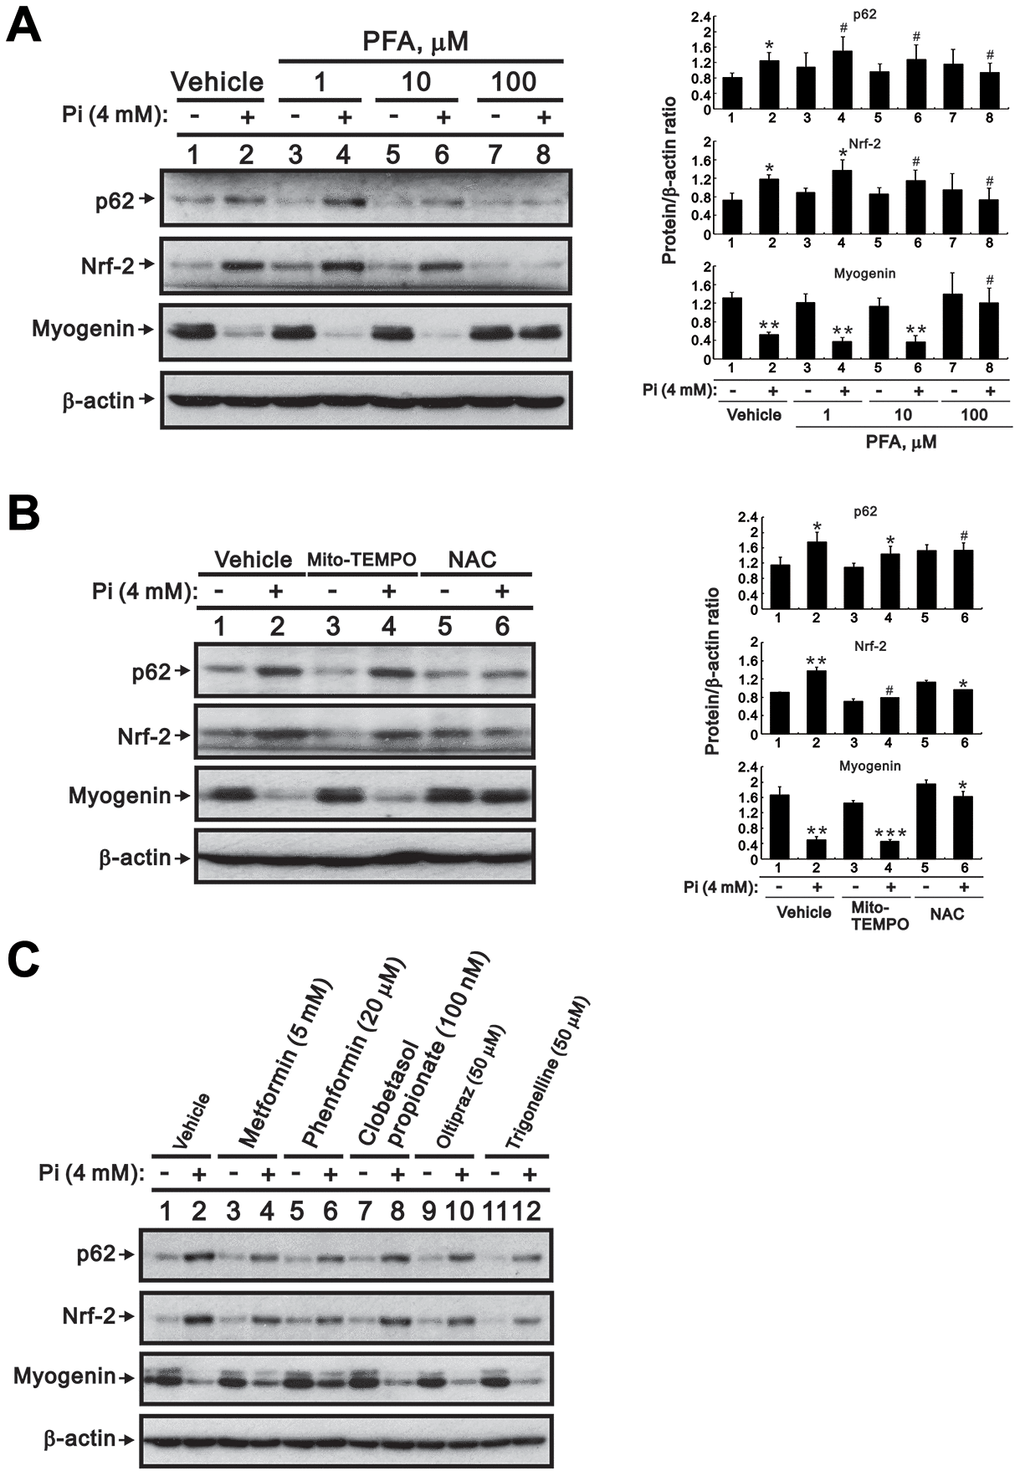 Inhibition of Pi transport, ROS production, or Nrf2 activity counteracts high Pi-induced changes in Nrf2, p62, and myogenin expression in differentiated C2C12 cells. (A, B) Representative immunoblots of p62, Nrf2, and myogenin expression in whole-cell lysates of 3-day-differentiated C2C12 cells treated for 24 h with (A) PFA or (B) 10 μM Mito-TEMPO or 10 mM NAC. (C) Immunoblot analysis of Nrf2, p62, and myogenin expression in whole-cell lysates of 3-day-differentiated C2C12 cells treated for 24 h with 4 mM Pi and various Nrf2 modulators. β-actin was used as loading control. Data are presented as means ± SEM. *P #P > 0.05.